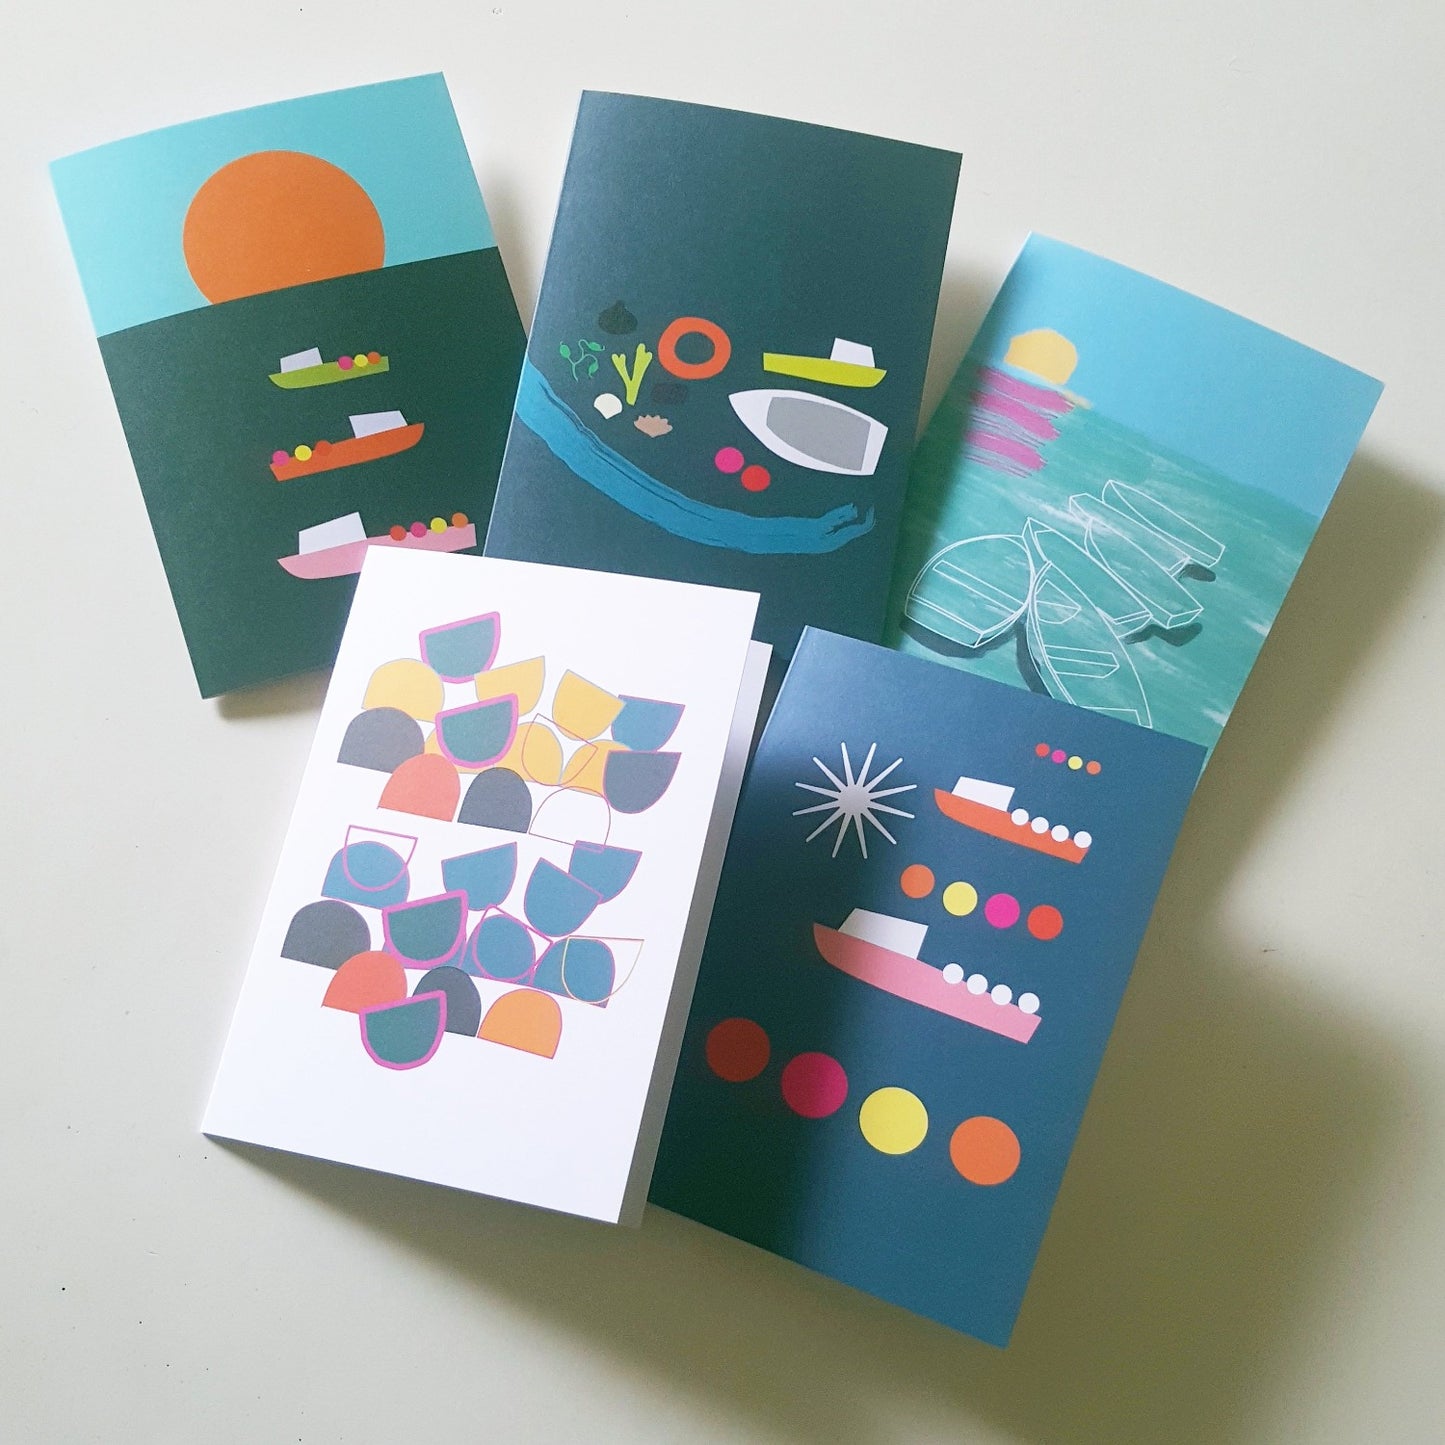 Set of greeting cards. 5 different modern digital designs inspired by the coast.